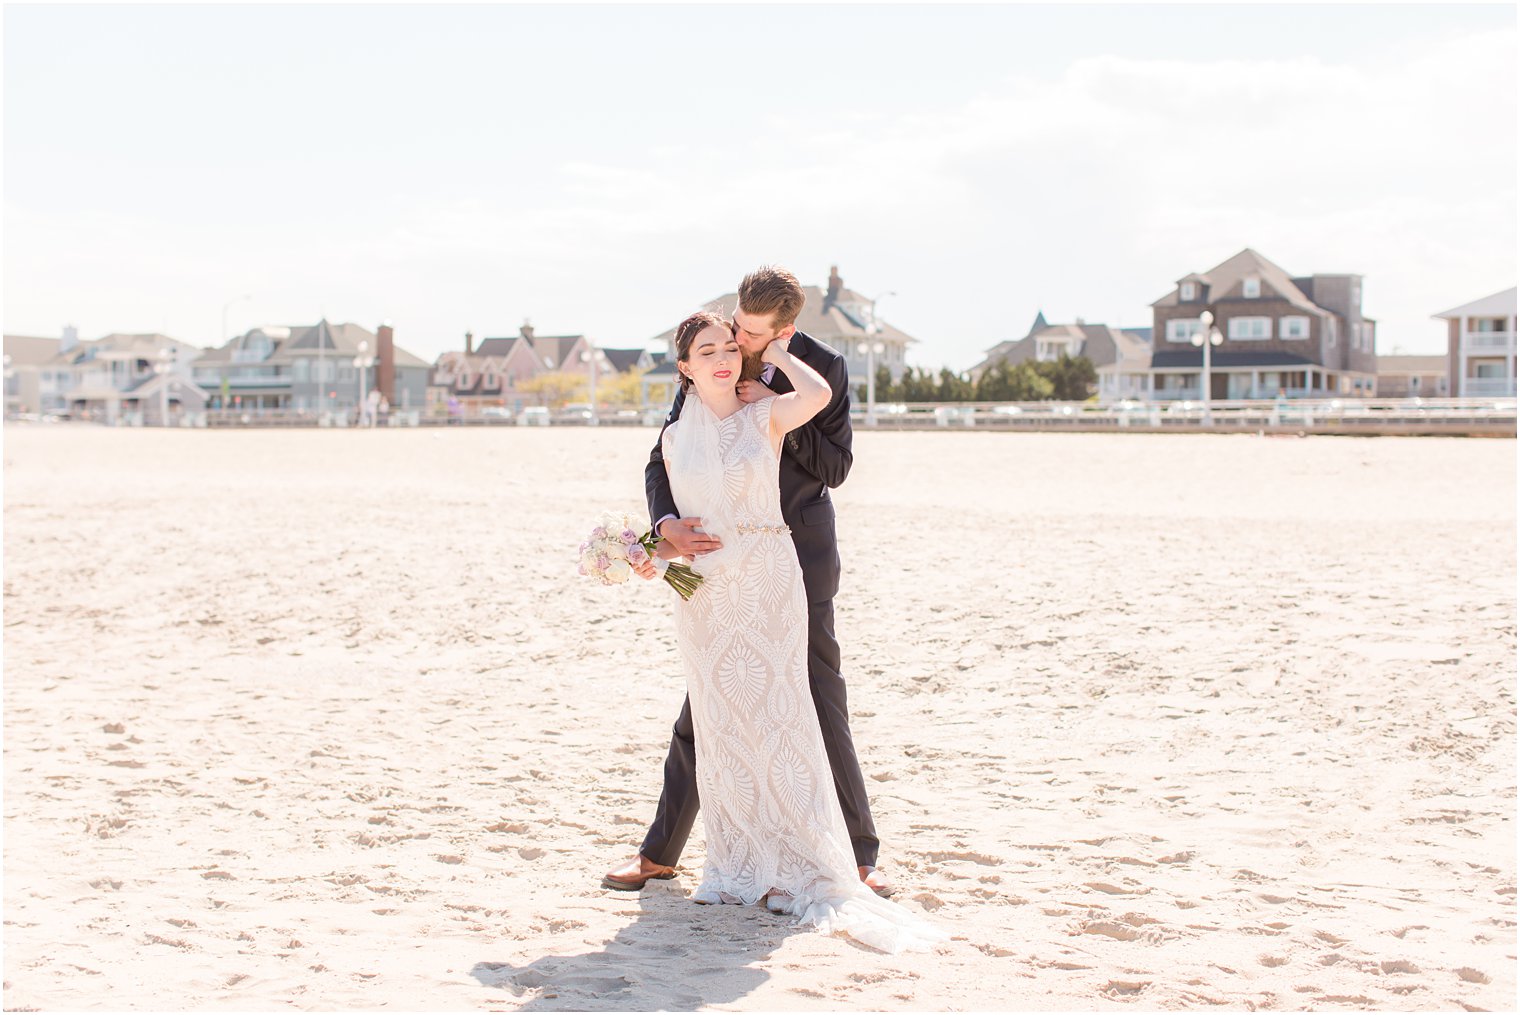 New Jersey beach wedding portraits of bride and groom